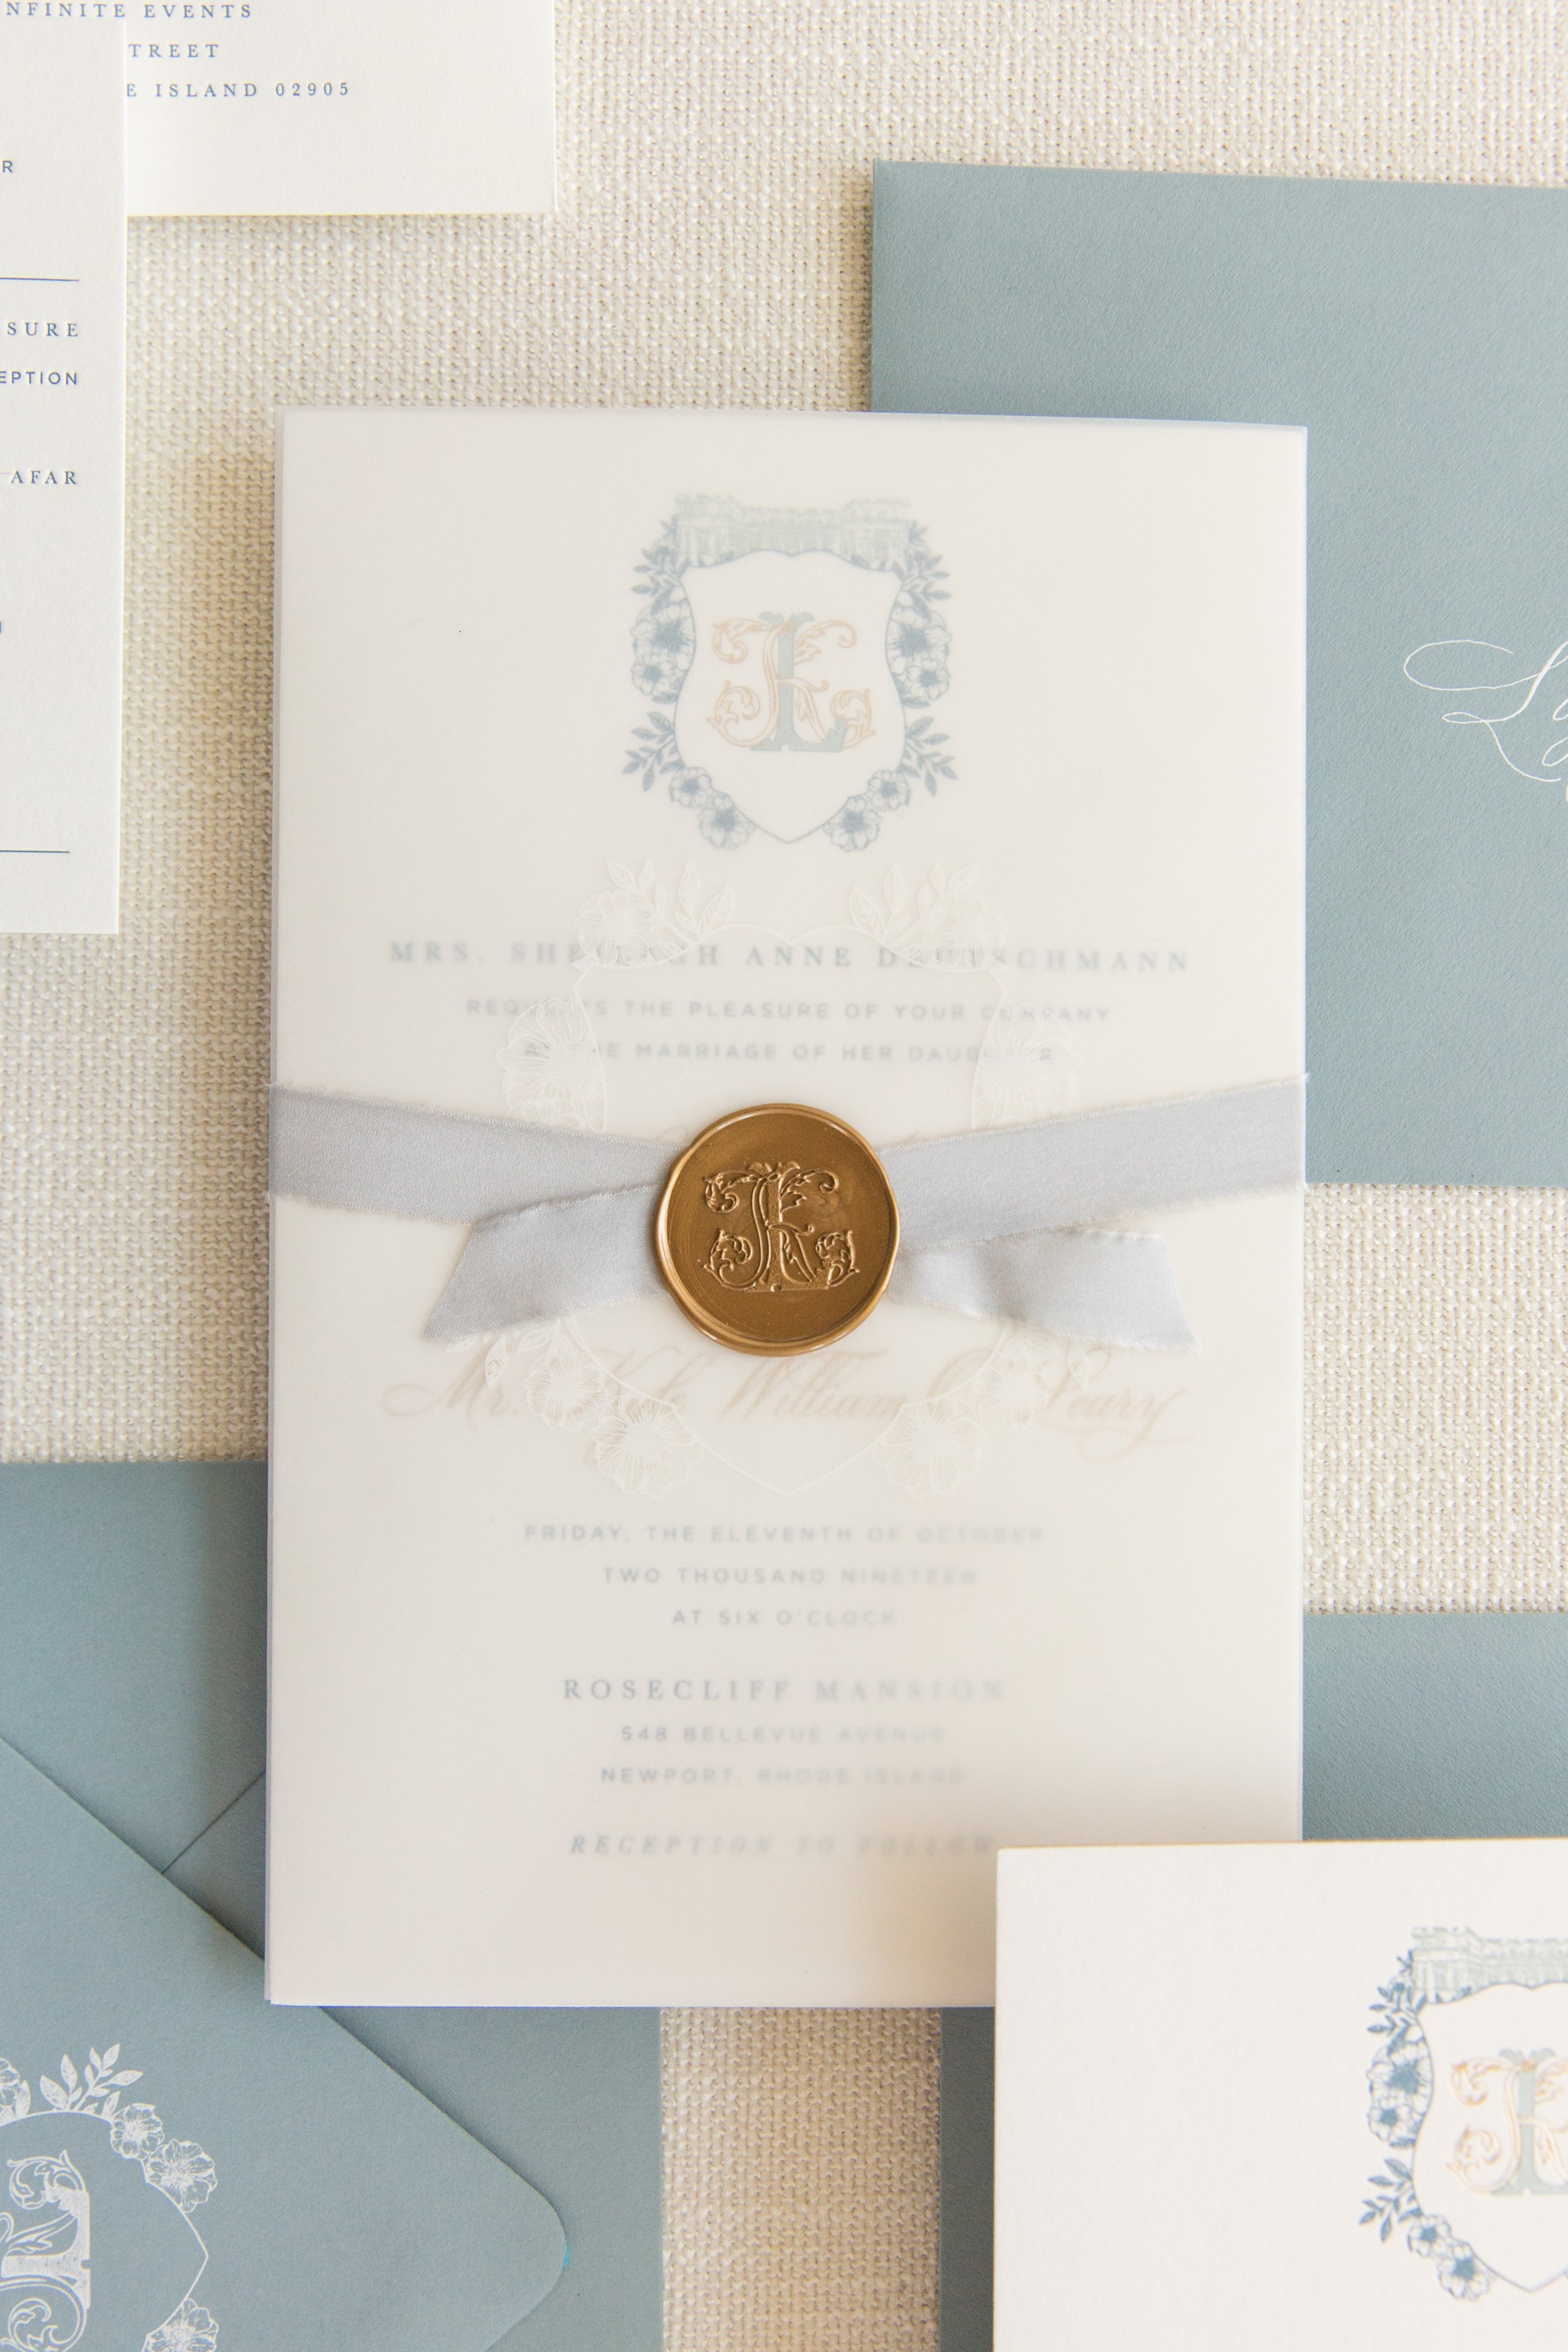 blue-letterpress-gold-classic-timeless-foil-printed-wedding-invitation-pemberley-collection-was-seal-vellum-wrap-champagne-and-ink-newport-ri-erin-mcginn-photography-original.jpg